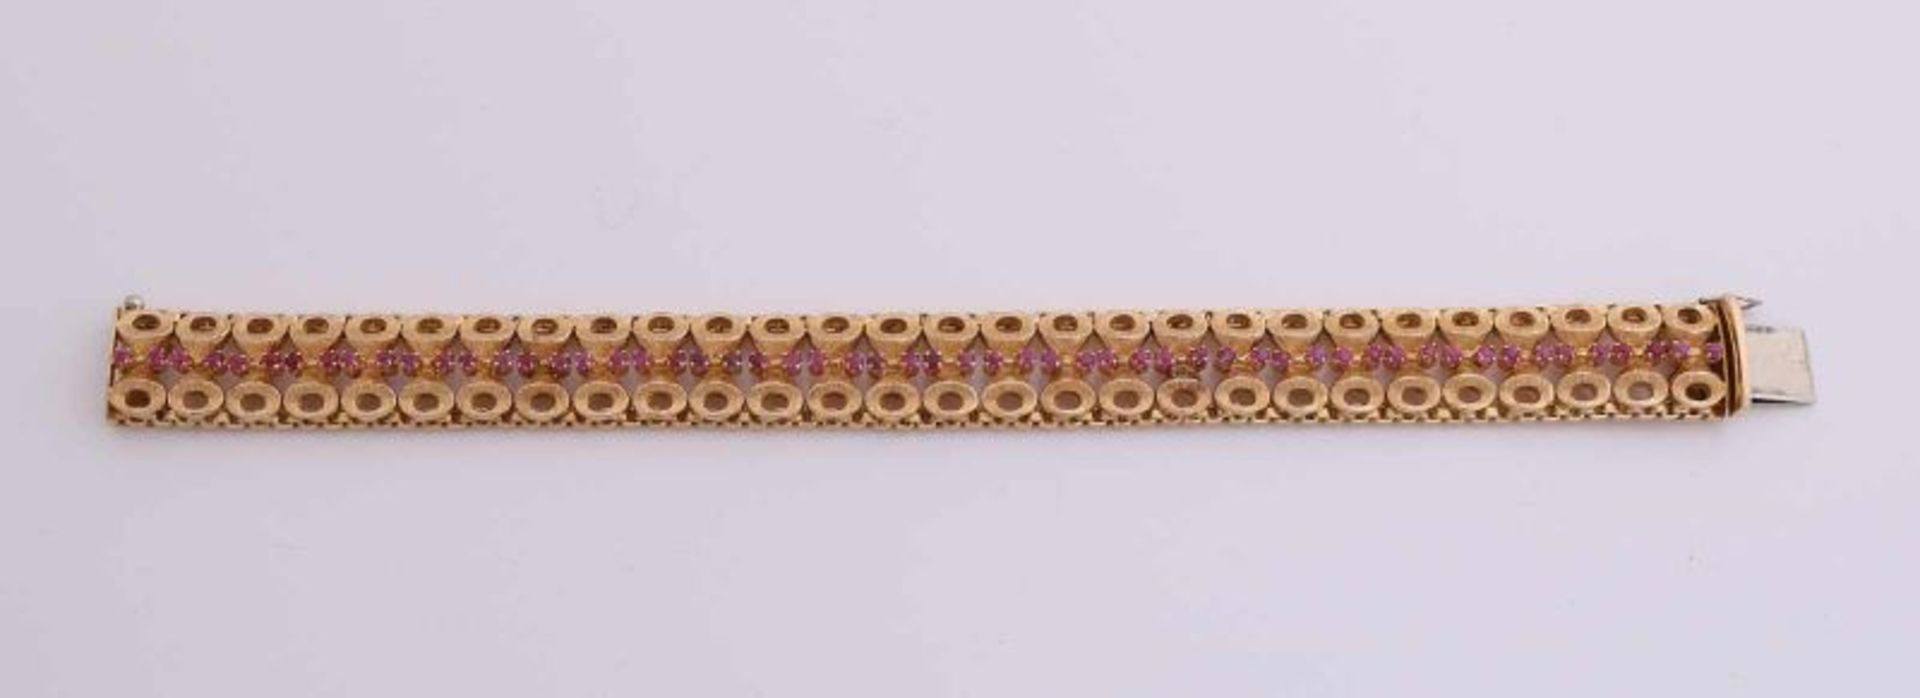 Elegant yellow gold bracelet, 750/000, with rubies. Wide gold link bracelet with matte processing. - Image 2 of 2